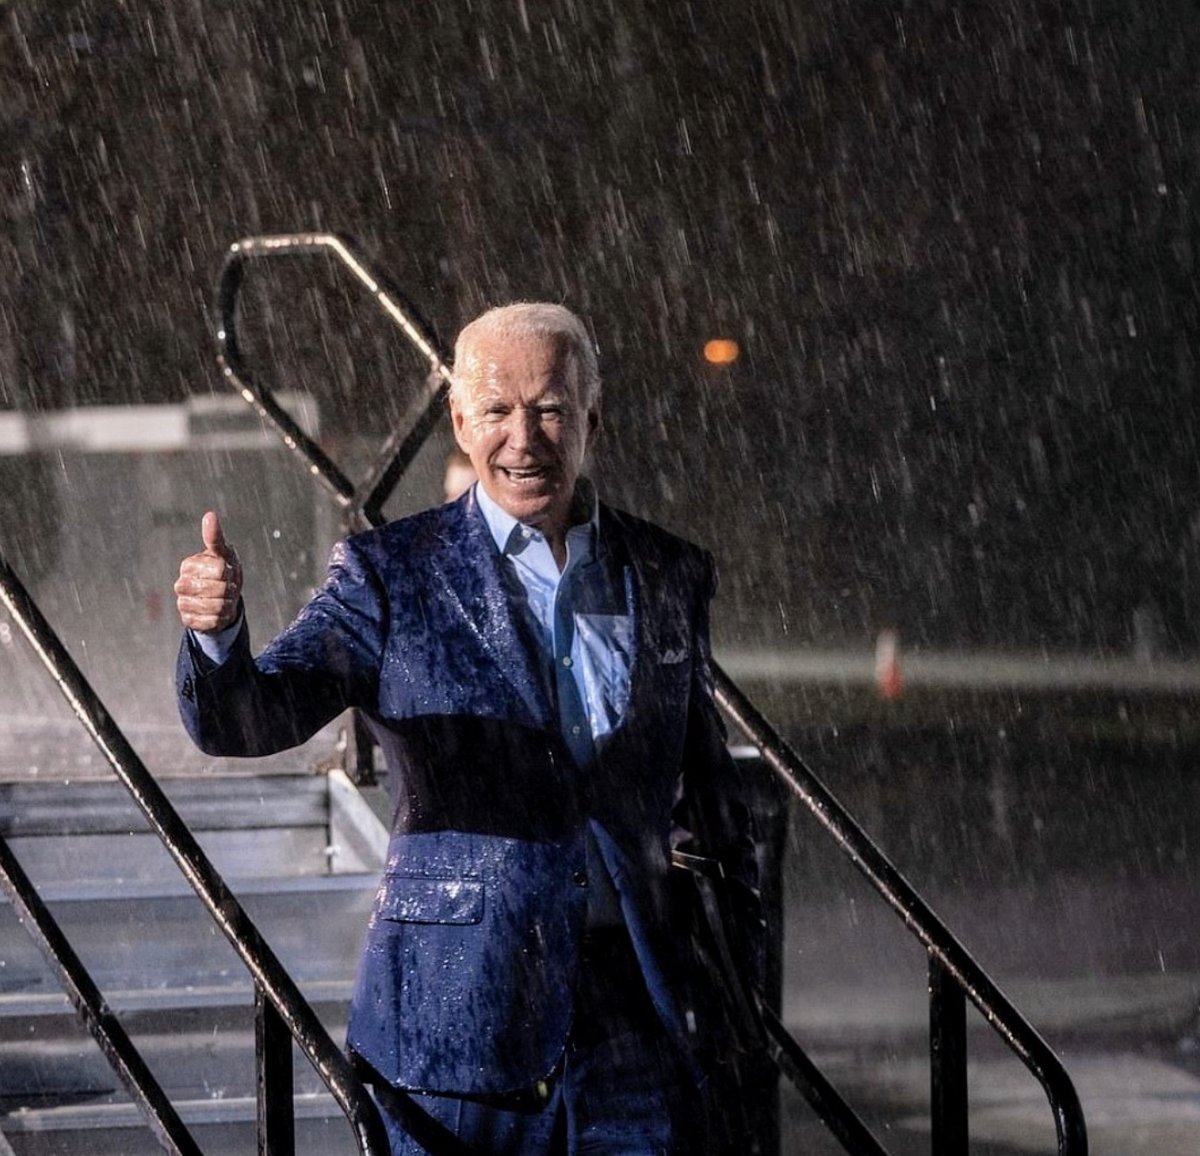 Trump just cancelled a rally because of rain.

Anyways, here is a photo of Joe Biden at a campaign event for no reason whatsoever.